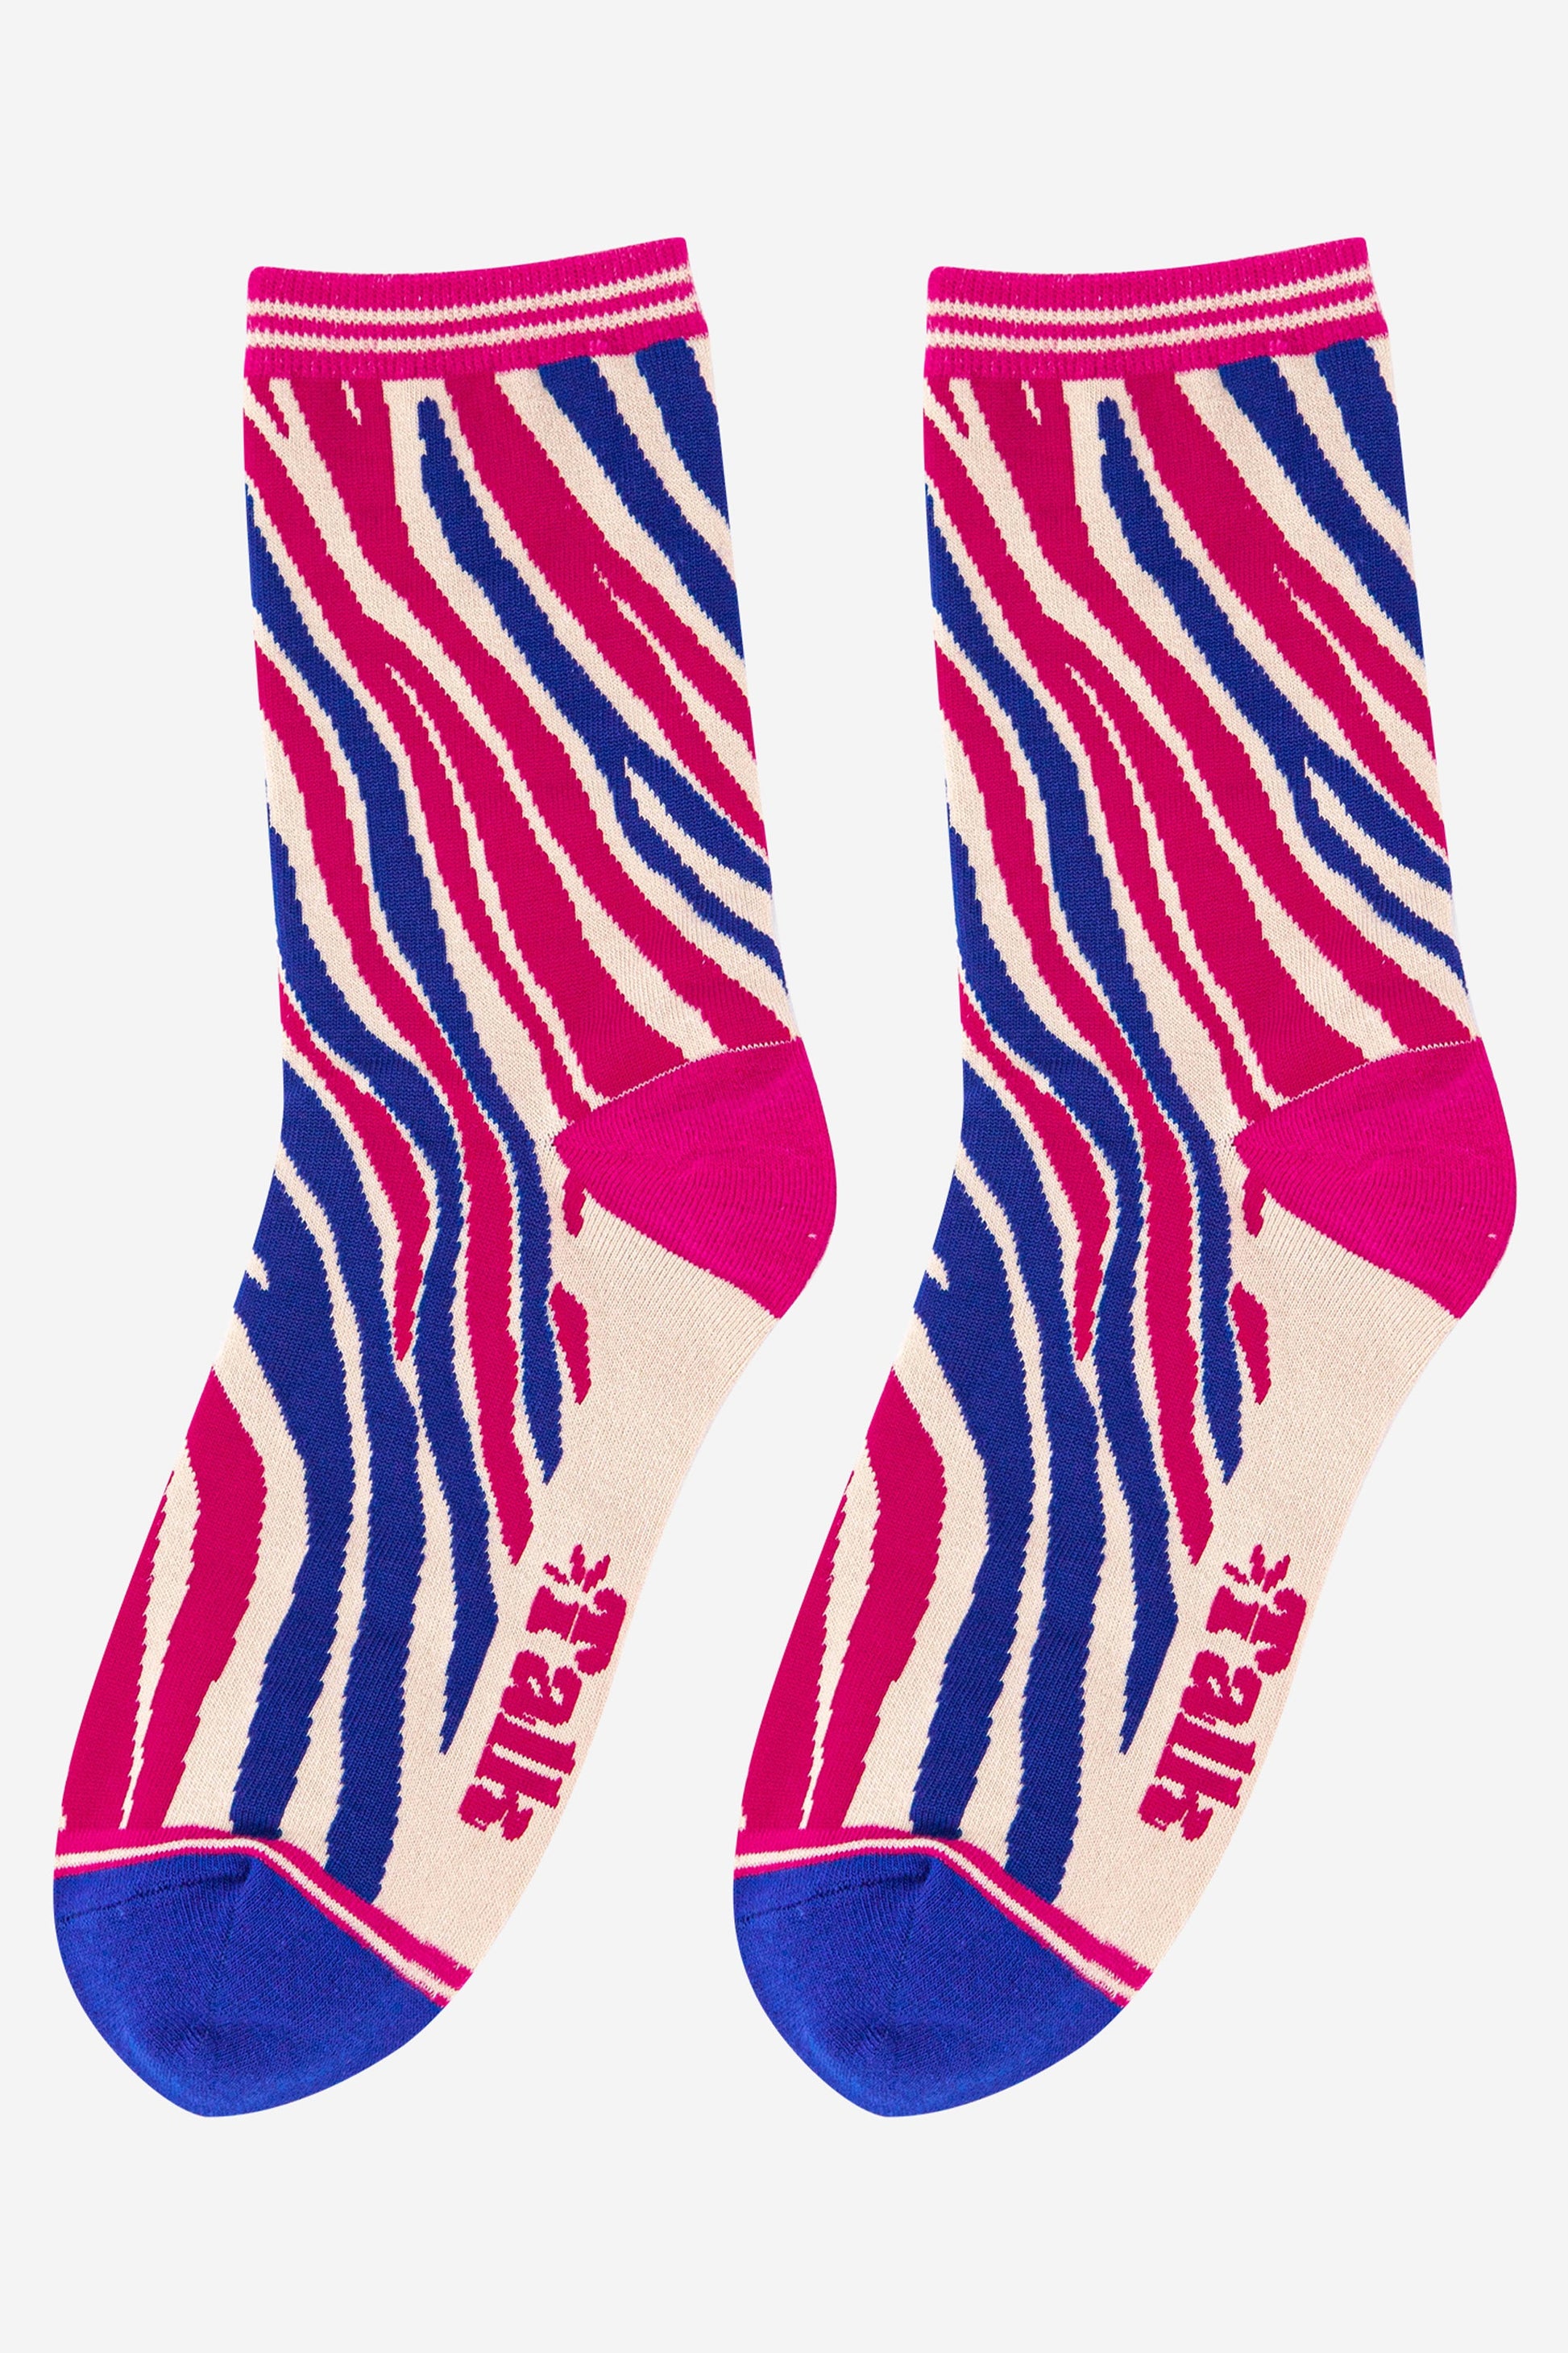 pink and blue zebra ankle socks with an all over zebra animal print pattern